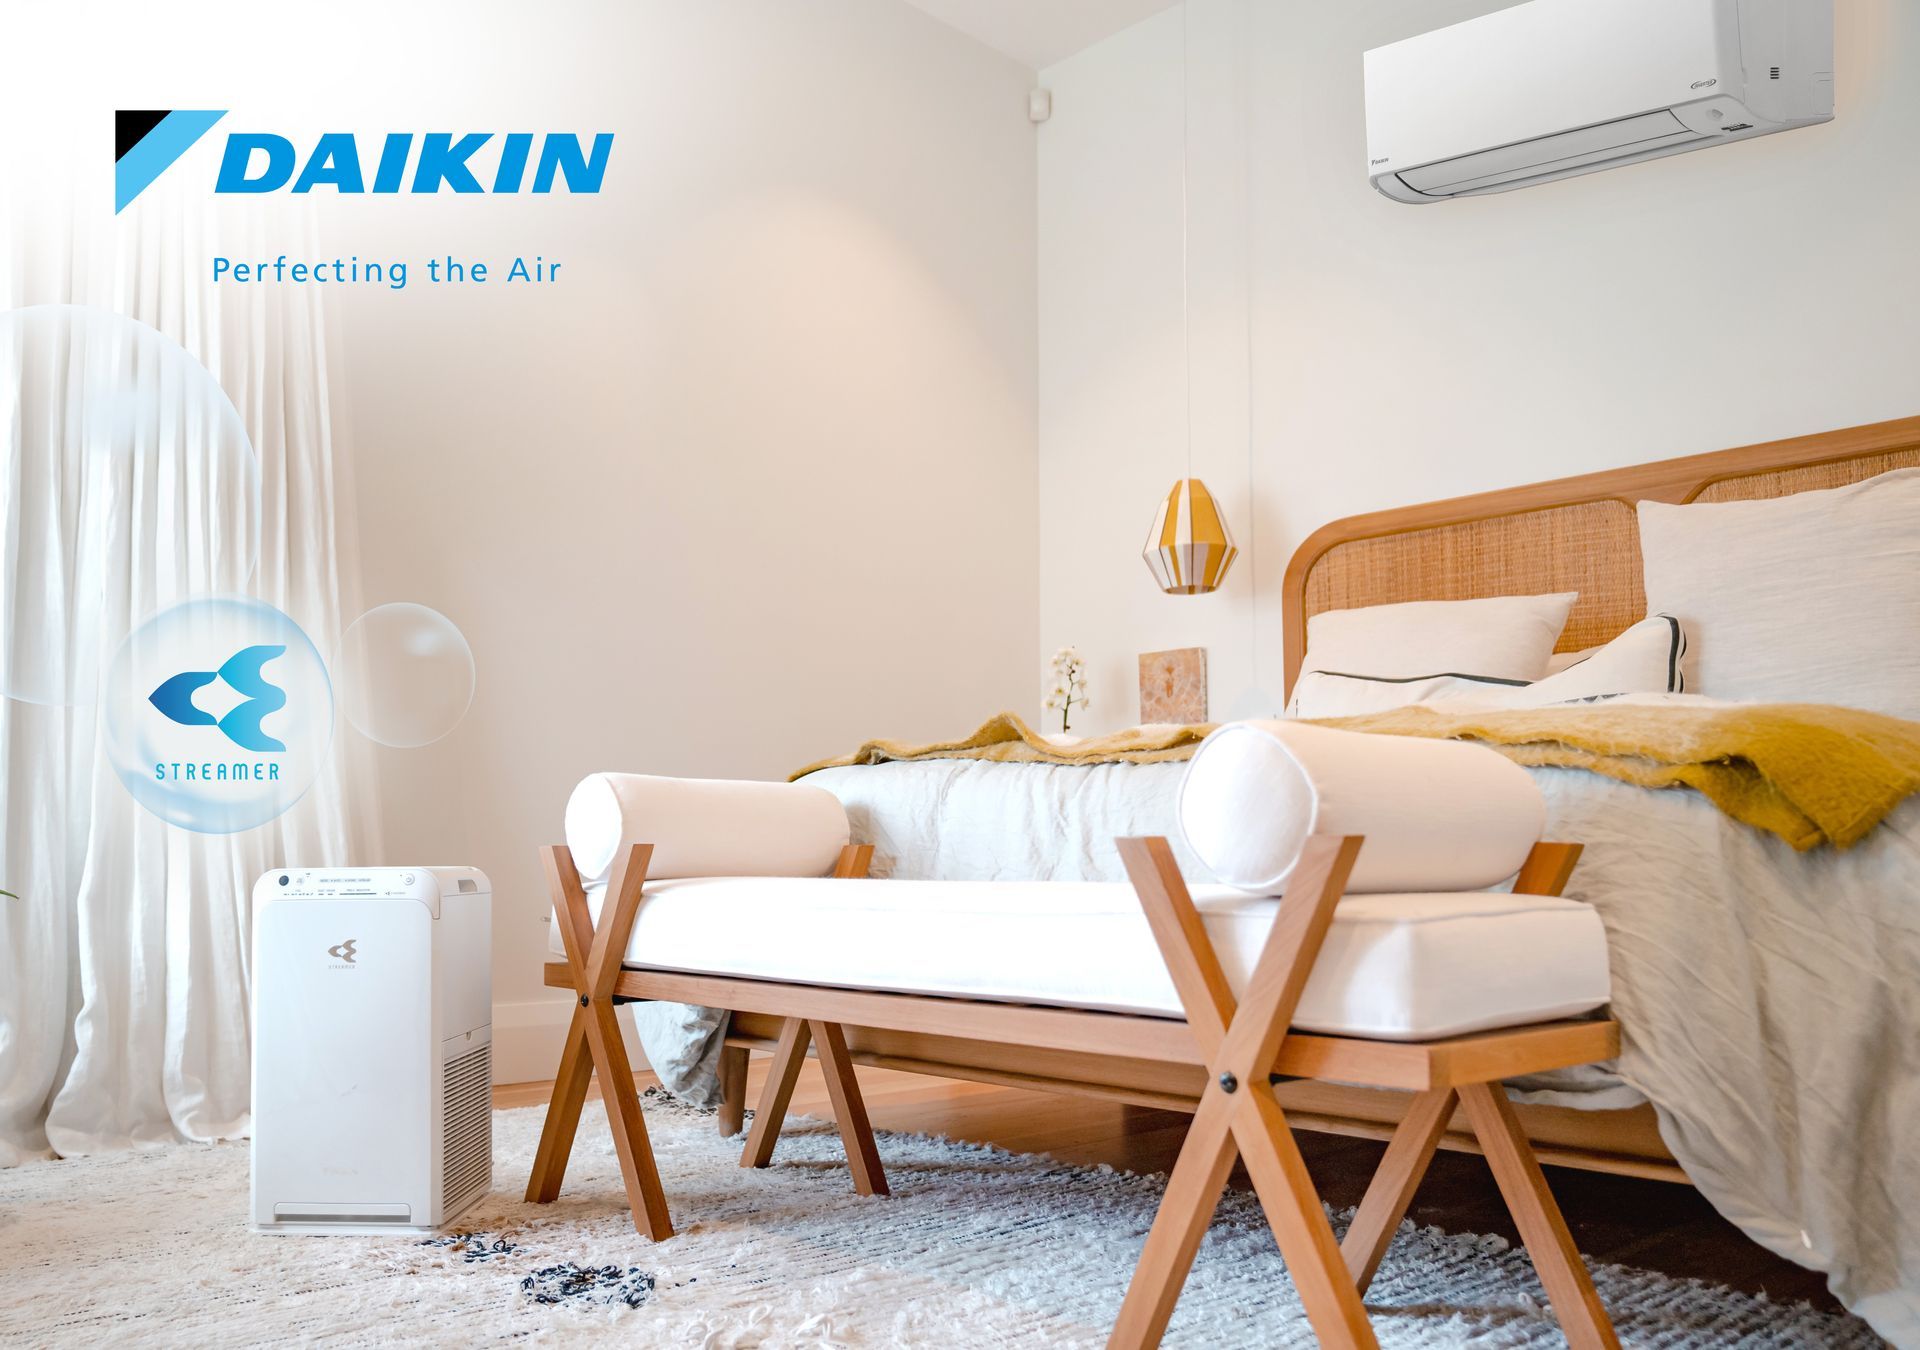 Bedroom with a Daikin Alira air conditioner/heat pump and stand alone air purifier